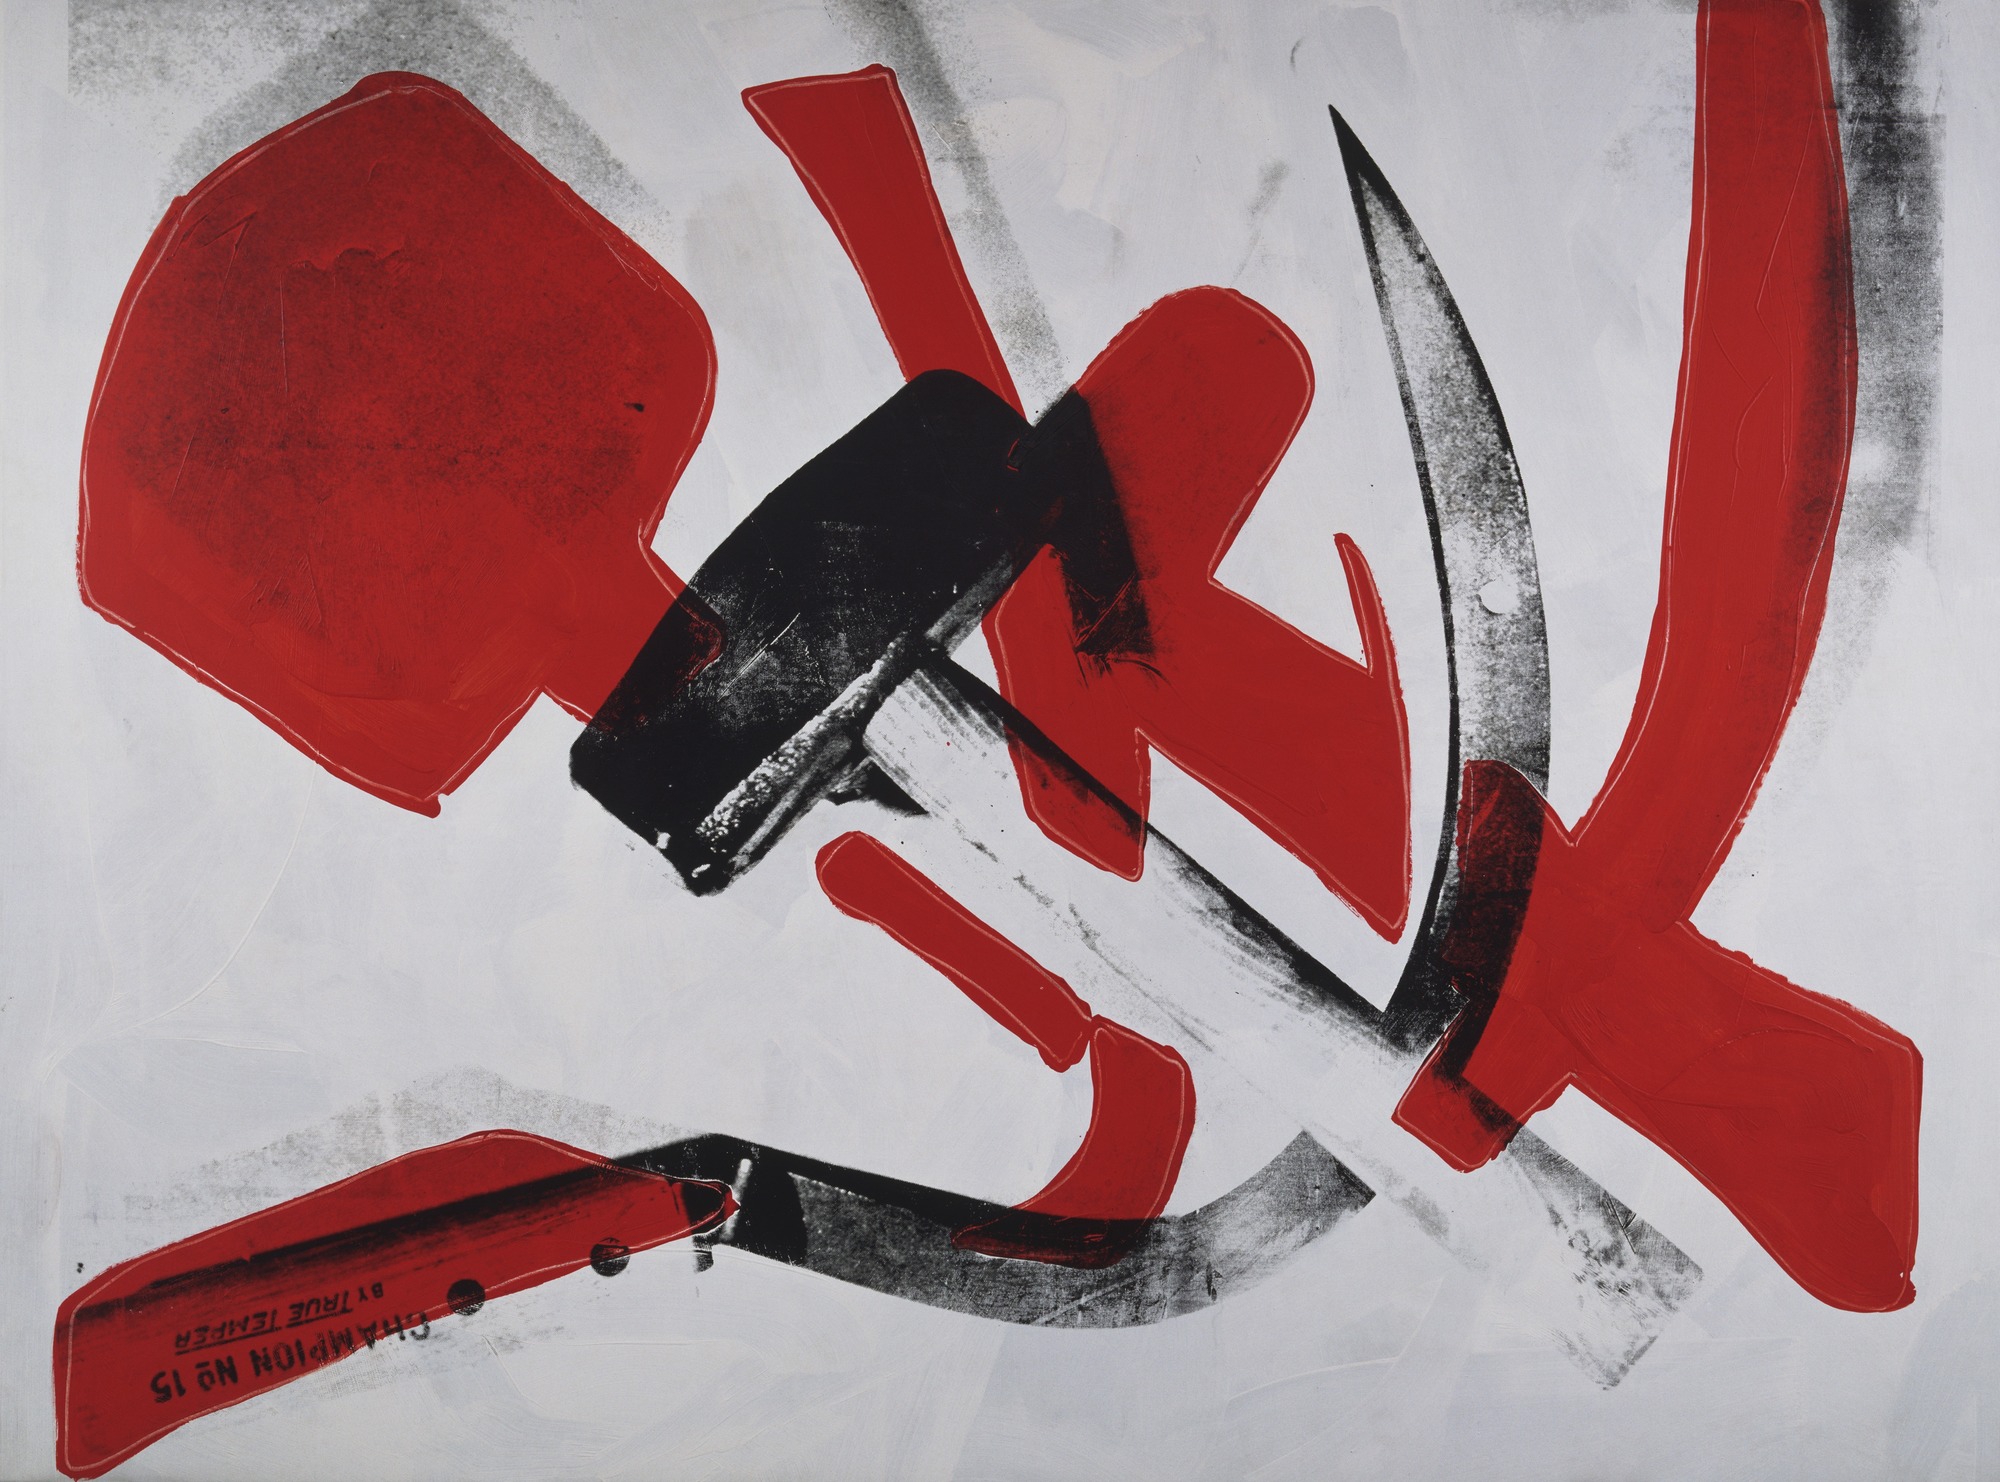 Andy Warhol, Hammer and Sickle (1976; New York, MoMA)